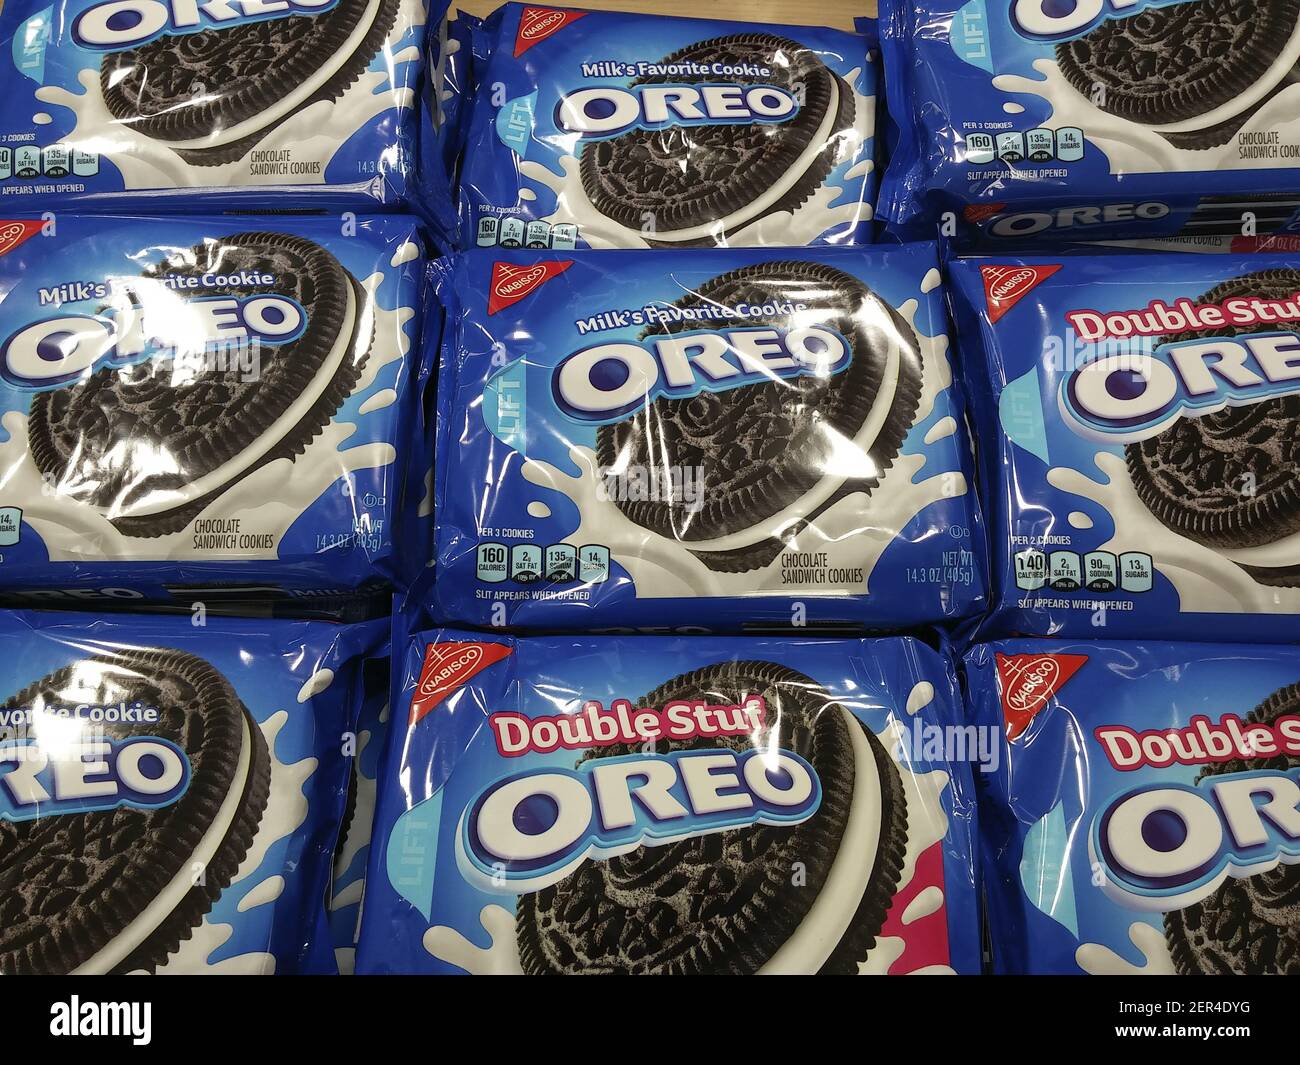 Boxes of Nabisco's Oreo Cookies in a supermarket in New York on Tuesday,  April 10, 2018. The company has upped the ante for cookie lovers by coming  out with multiple flavors of